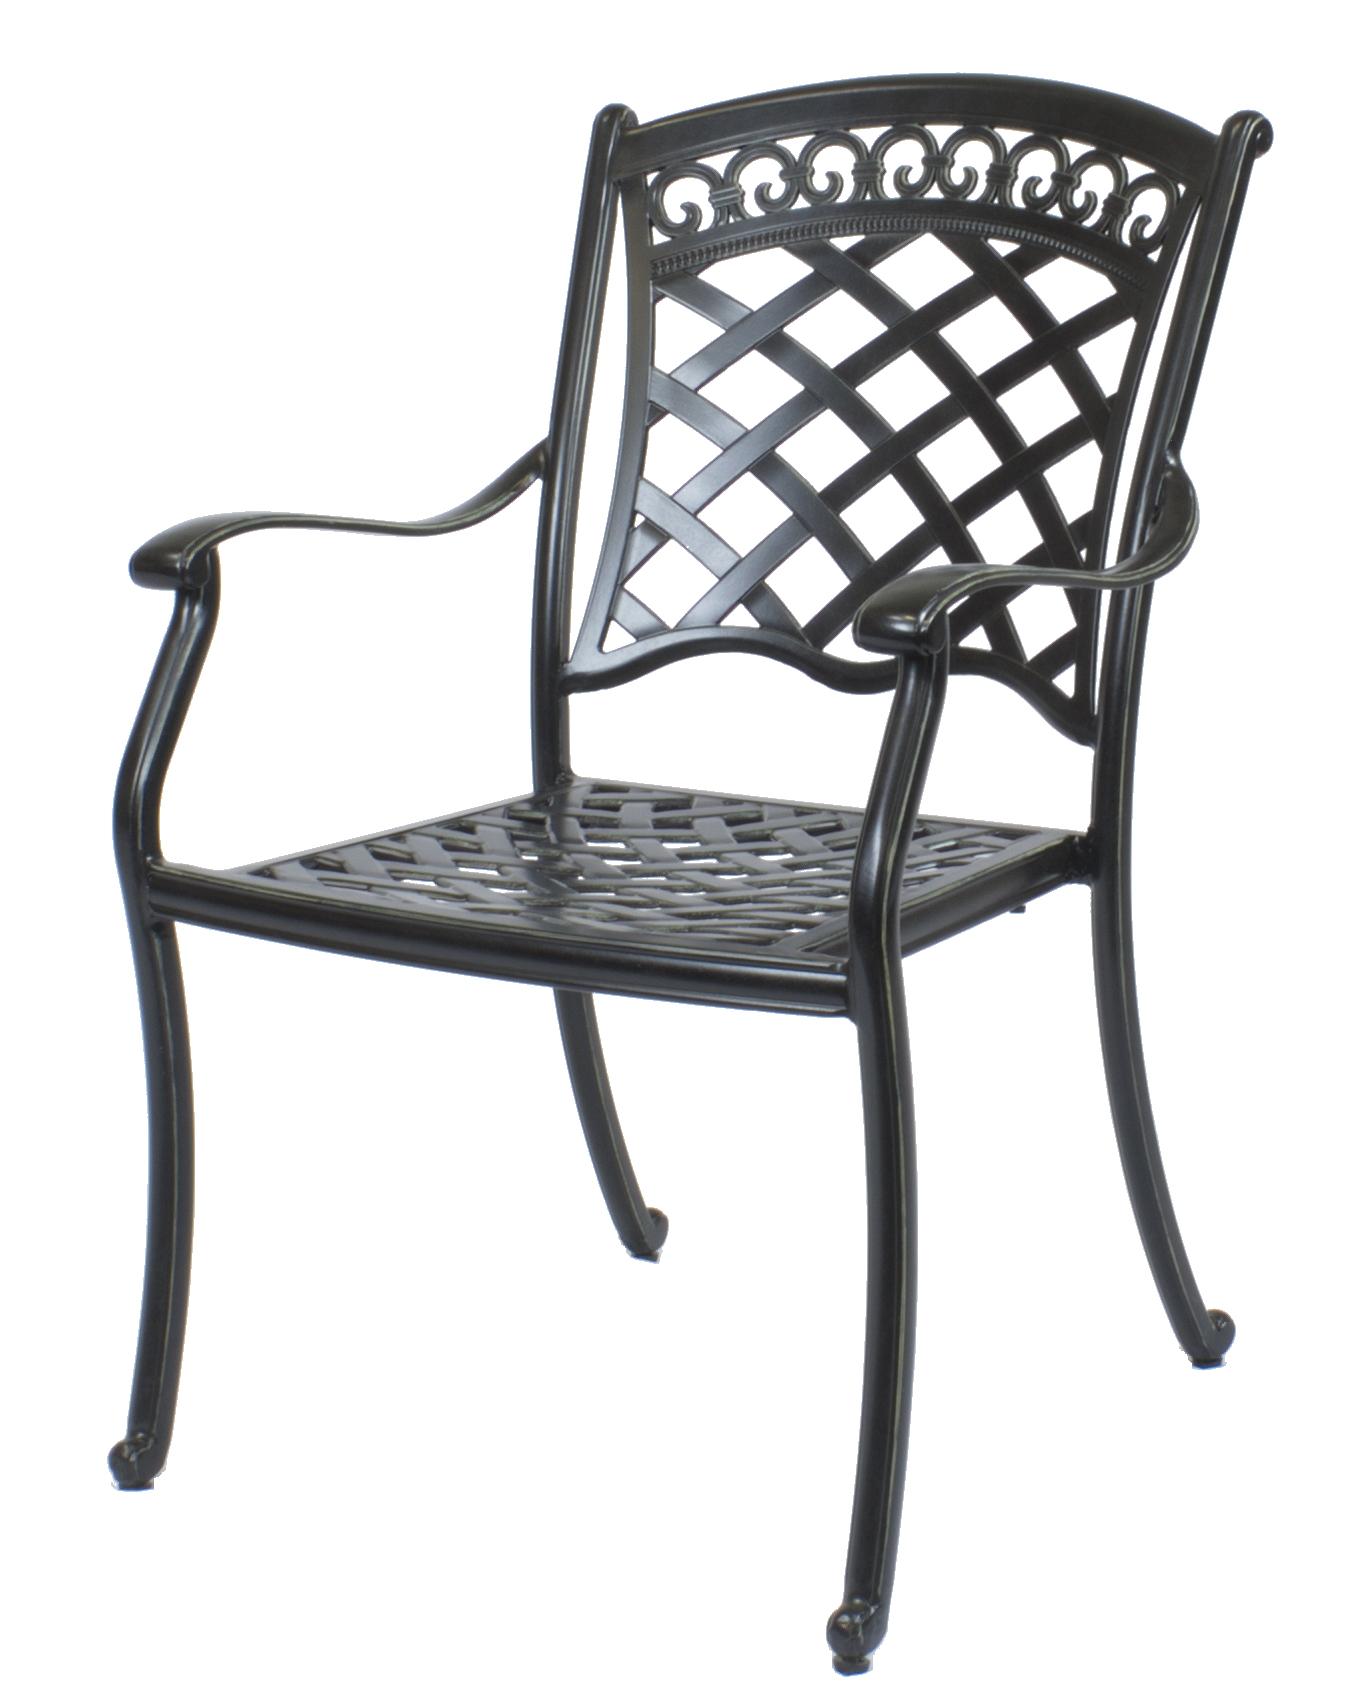 

    
St. Tropez Cast Alumnium Fully Welded Dining Chair  Set of 4 by CaliPatio SPECIAL ORDER
